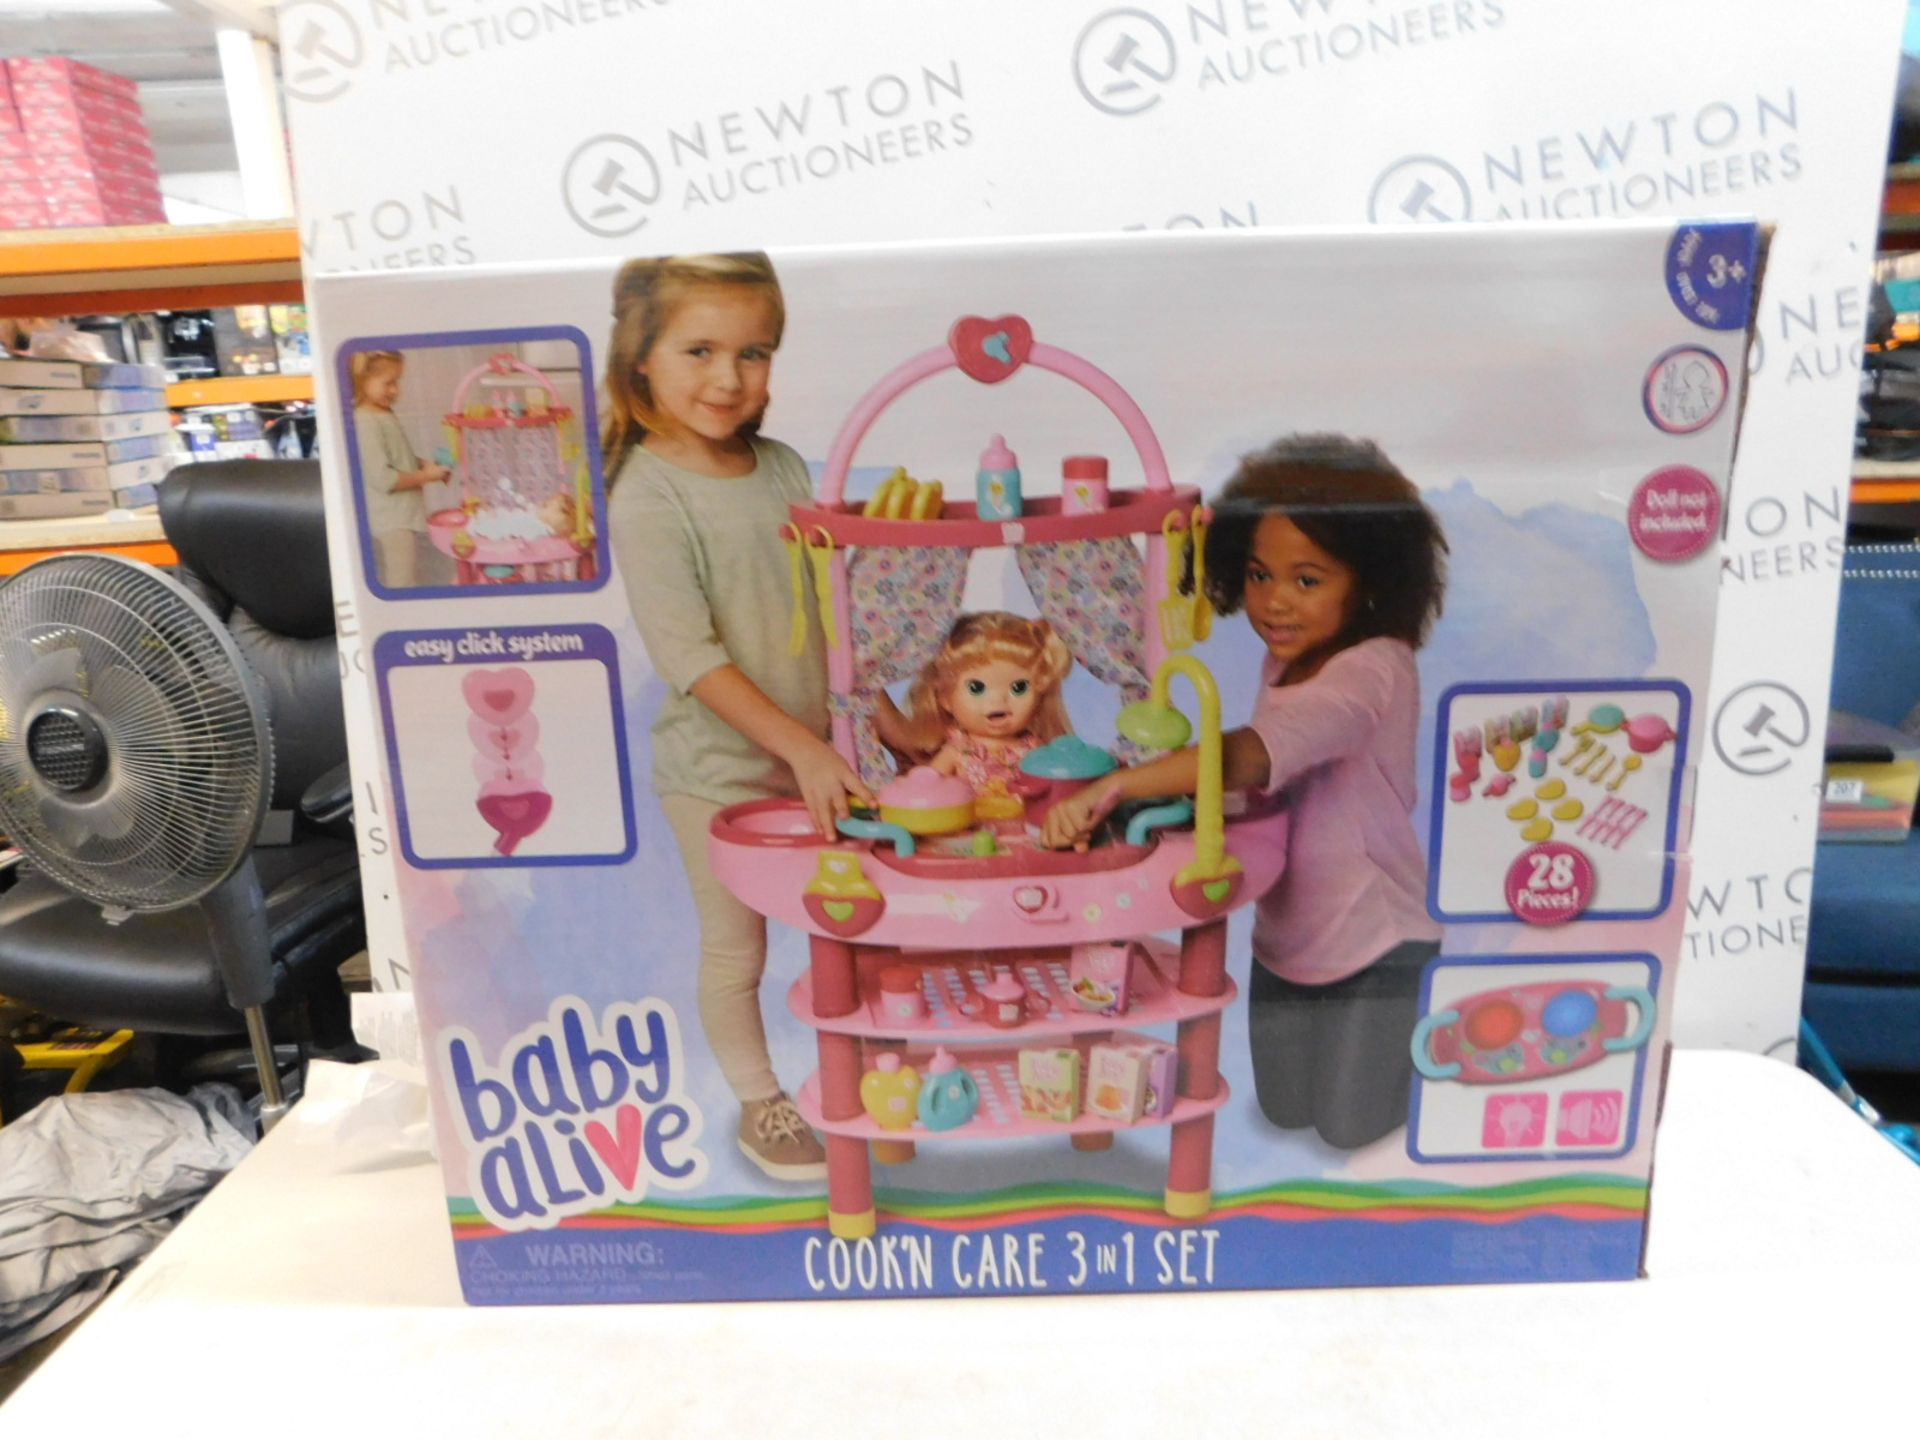 1 BRAND NEW BOXED BABY ALIVE COOK N CARE 3-IN-1 PLAYSET RRP Â£39.99